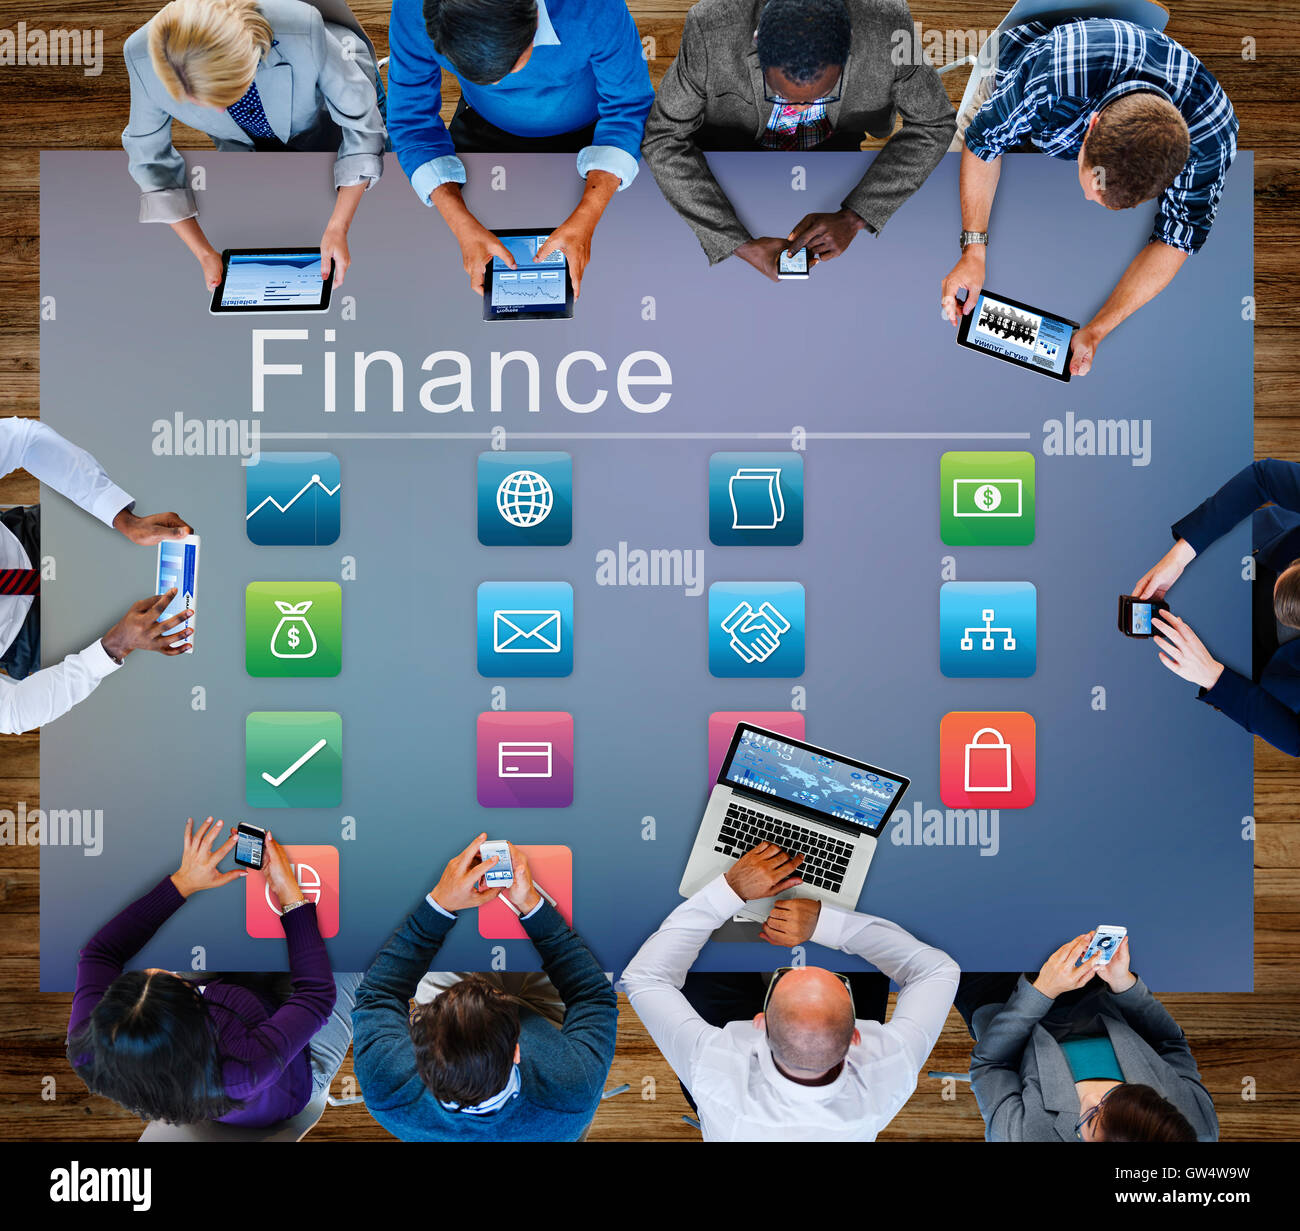 Finance Economy Application Investment Graphic Concept Stock Photo